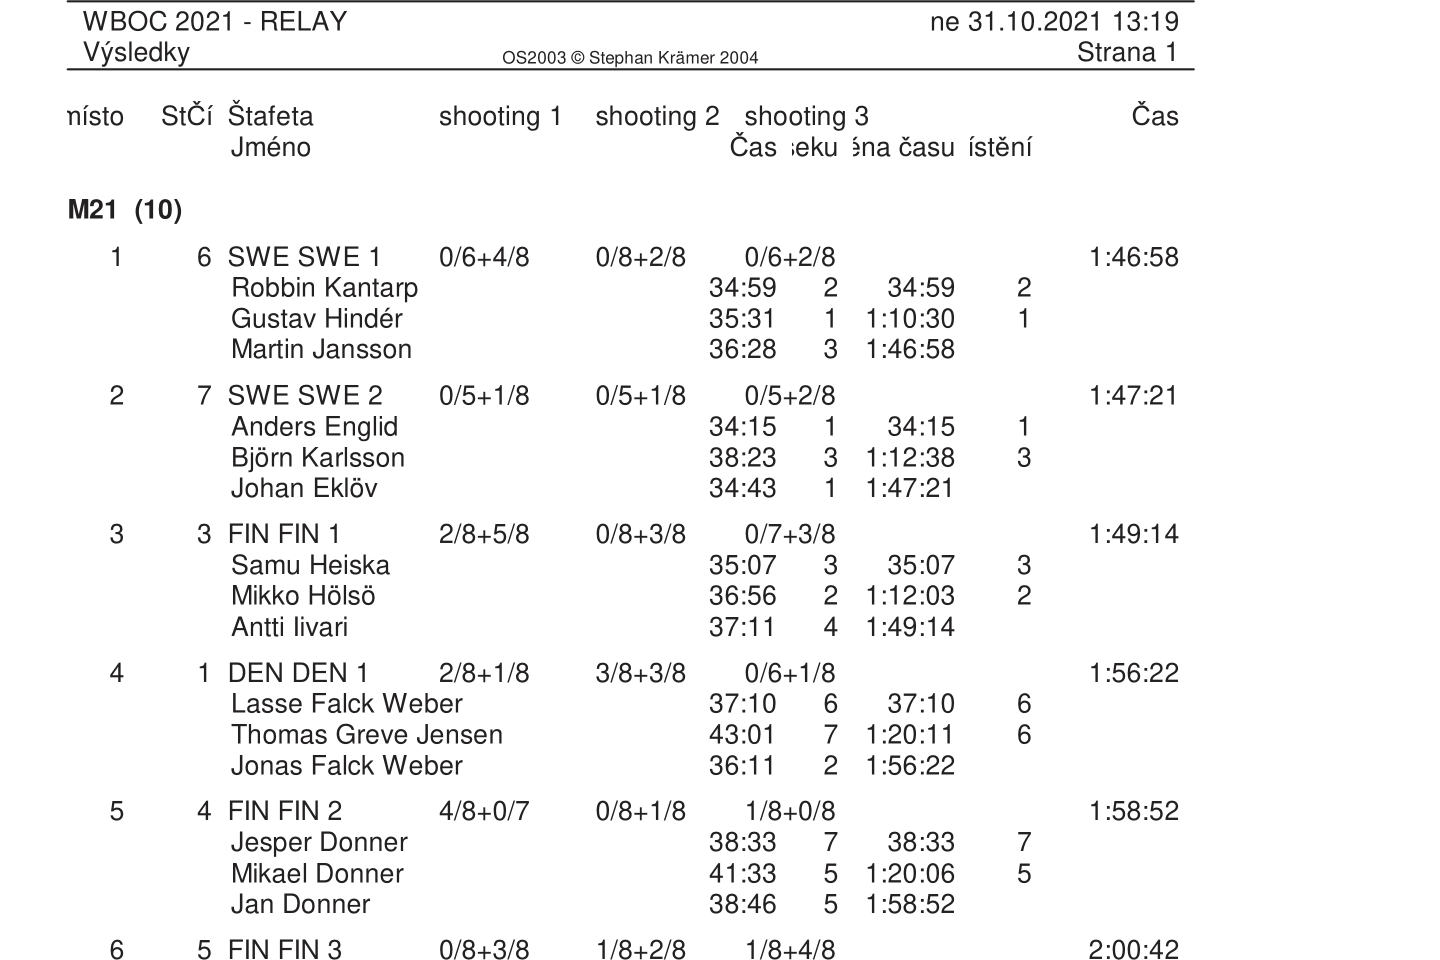 Download RELAY results